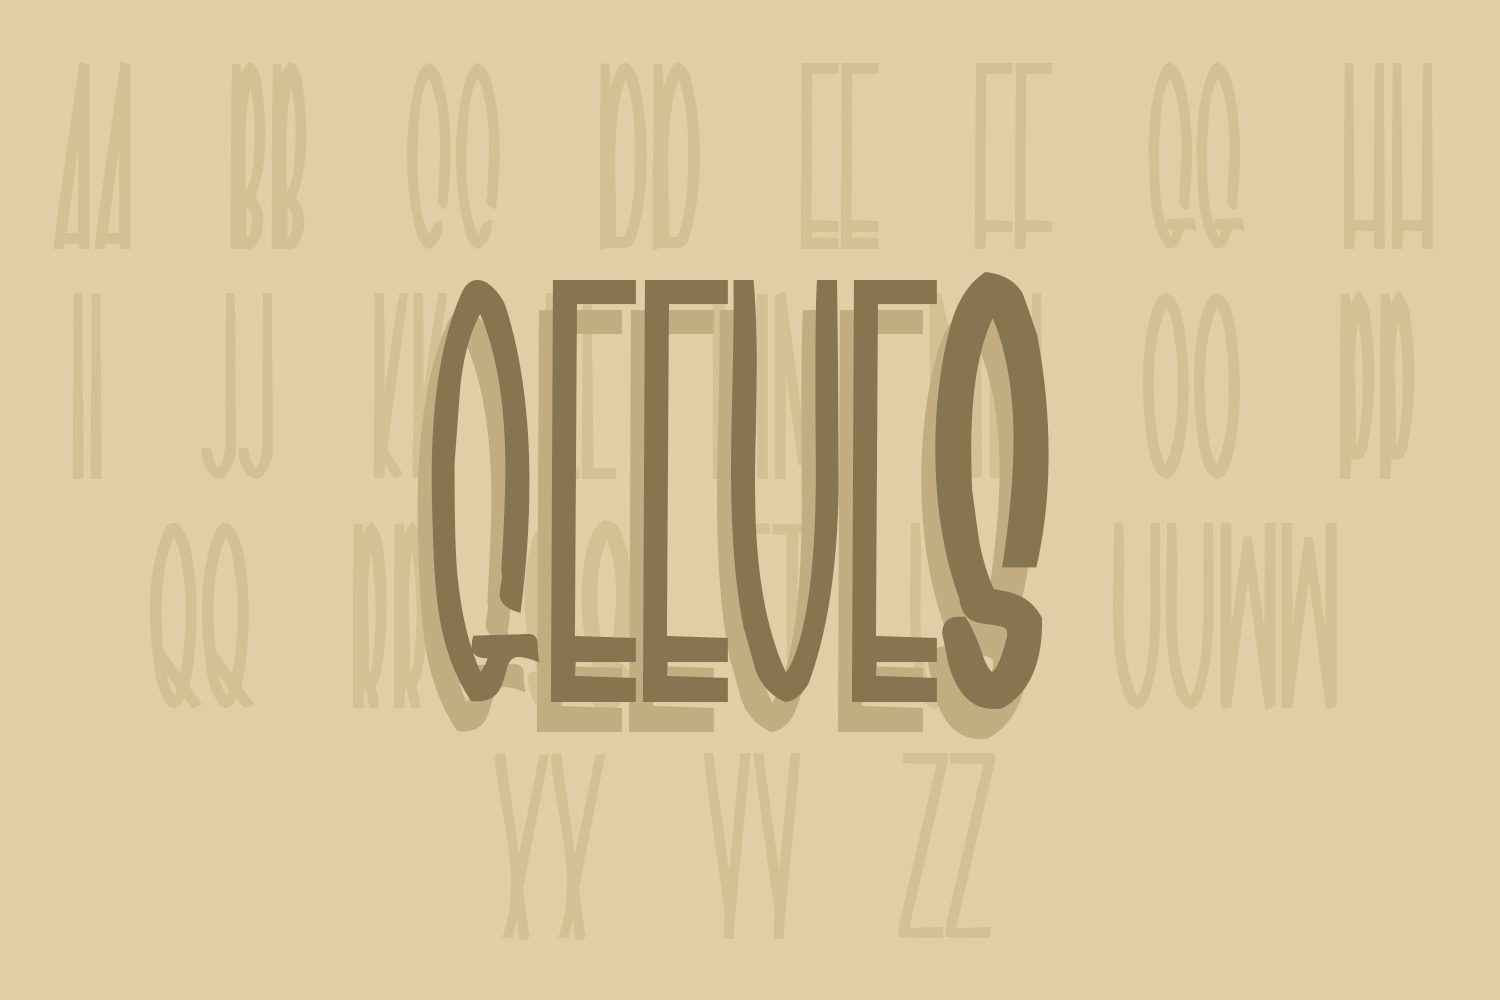 Geeves Font free download